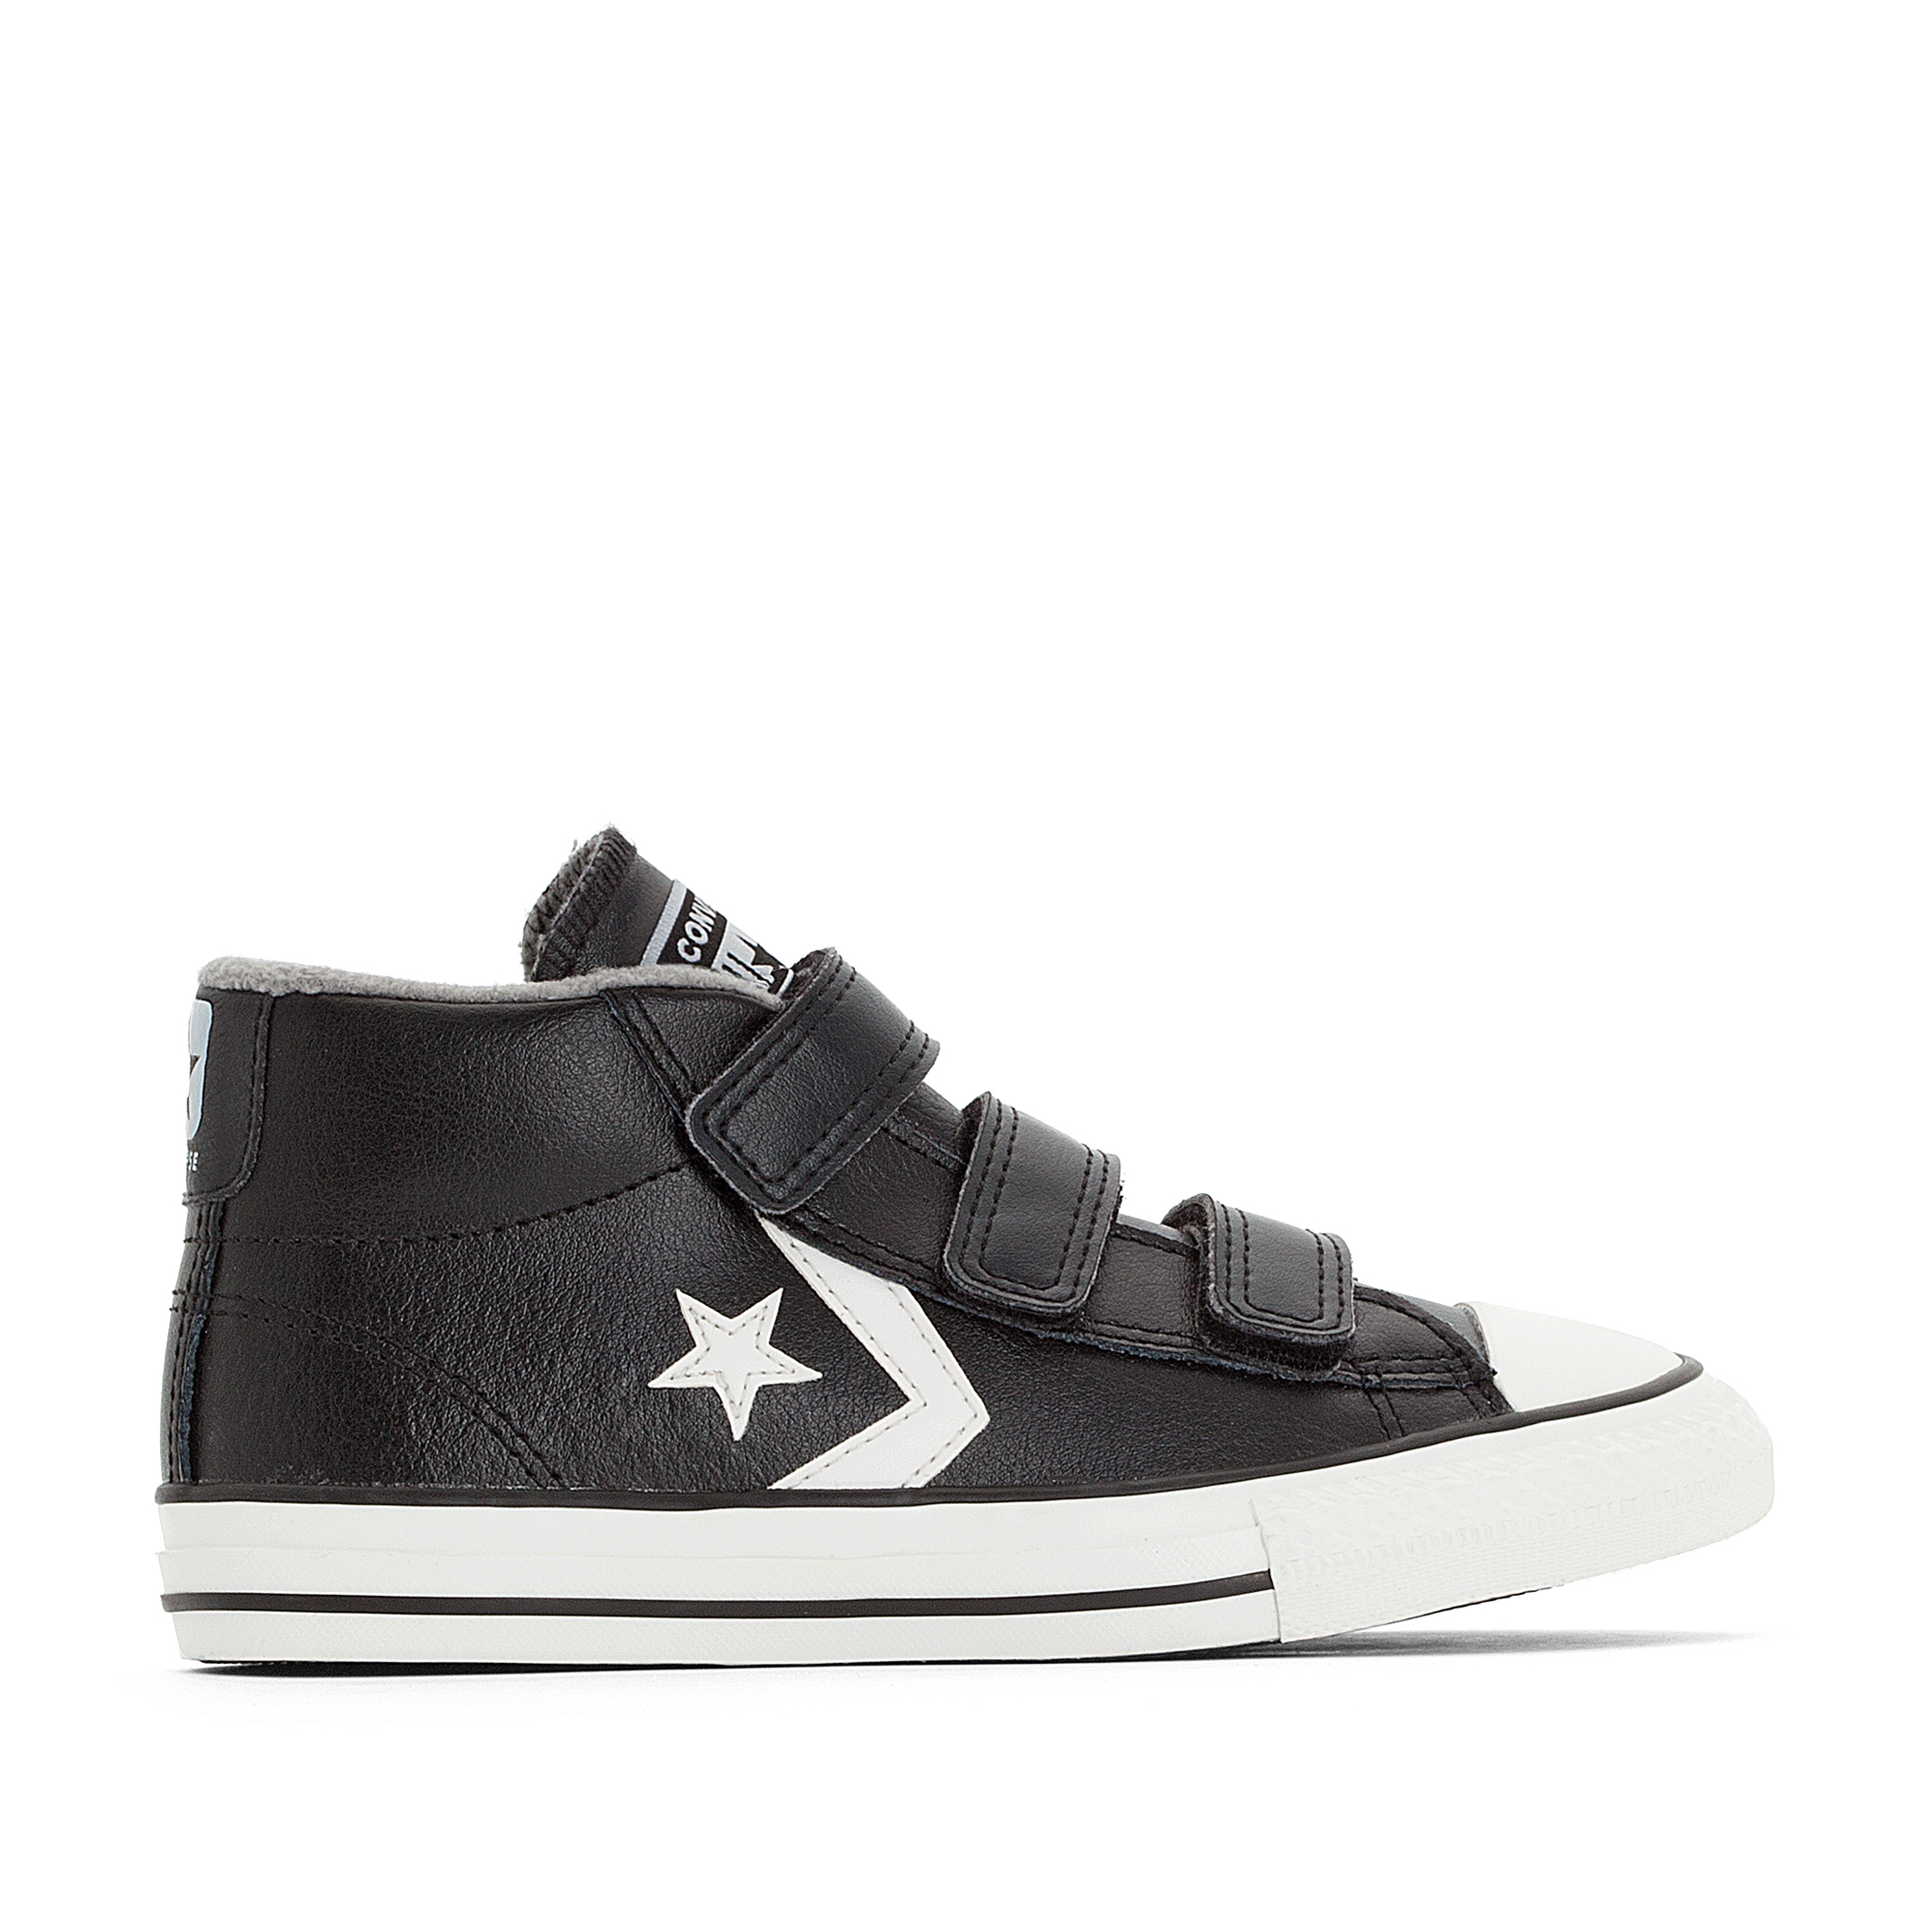 converse one star mid leather black